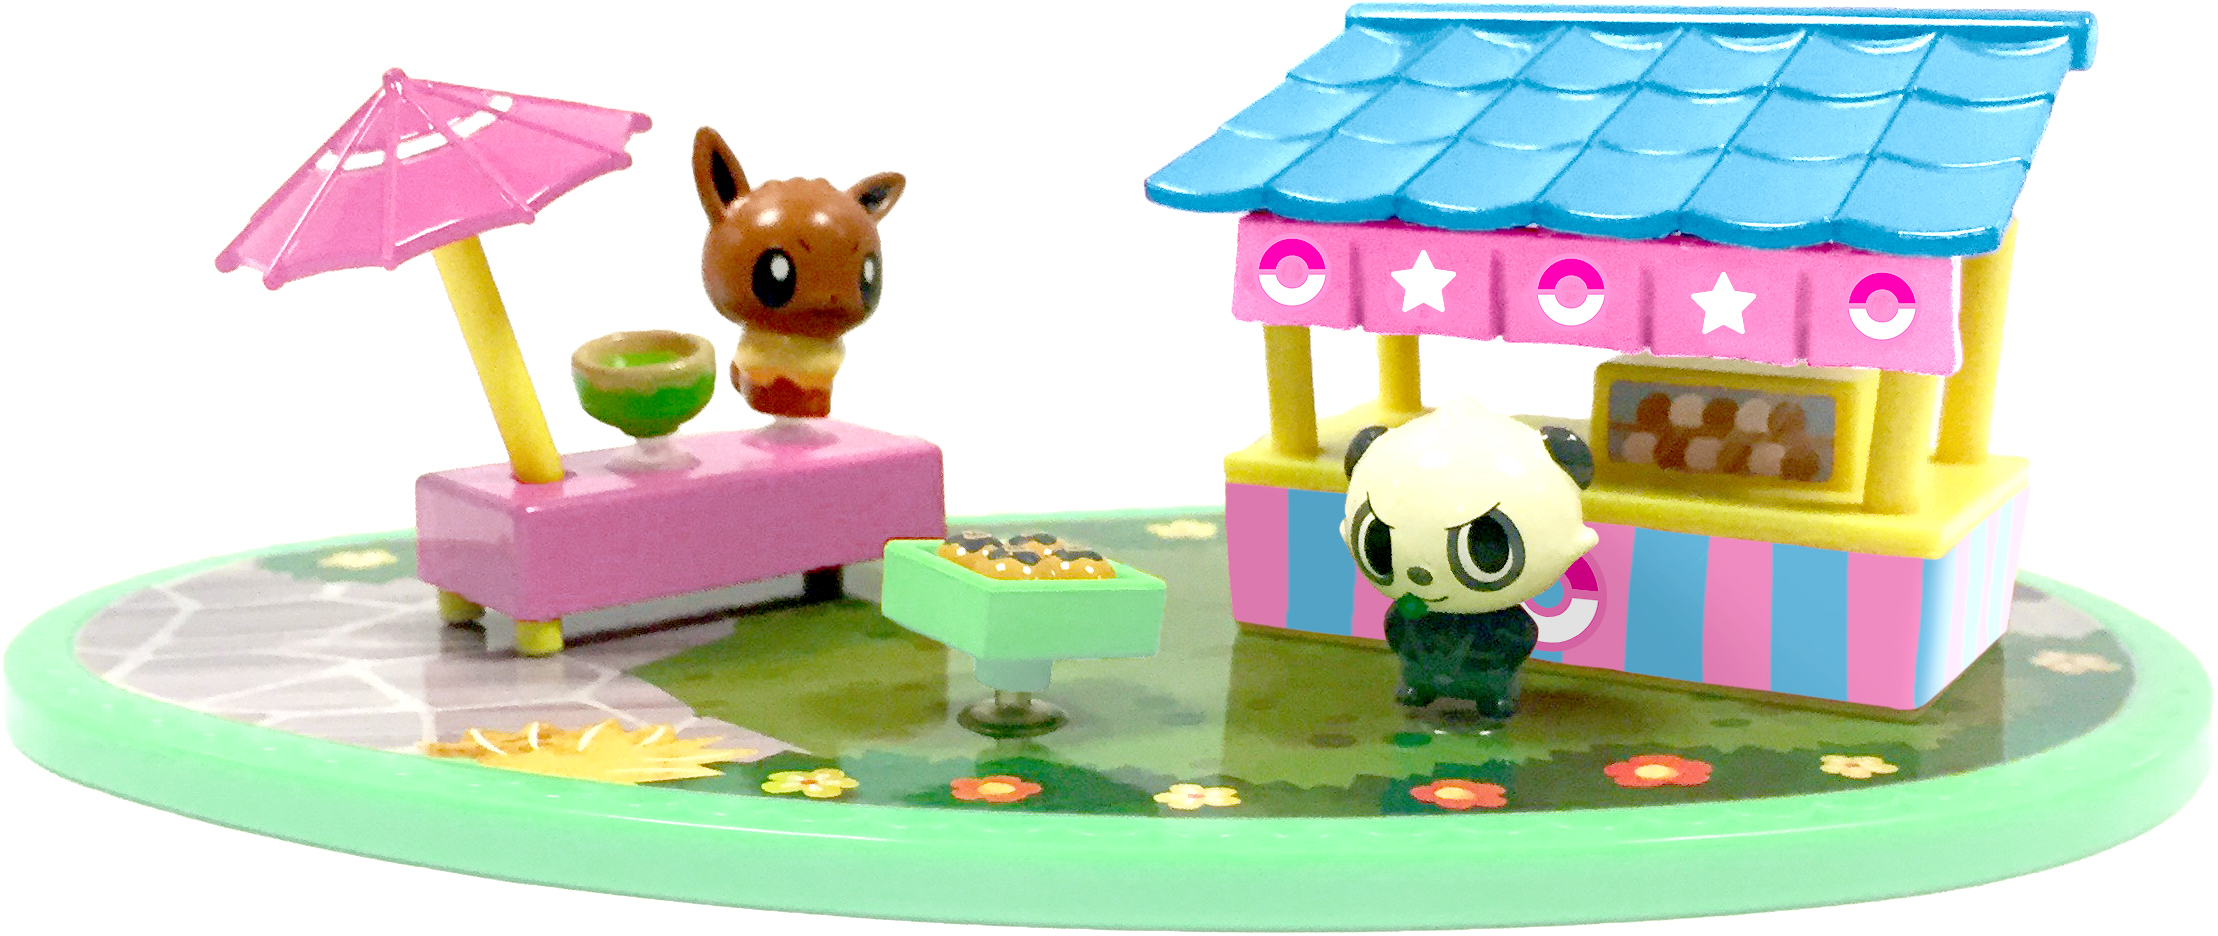 These Pokémon Toys Are For Girls, But Boys Will Want Them Too